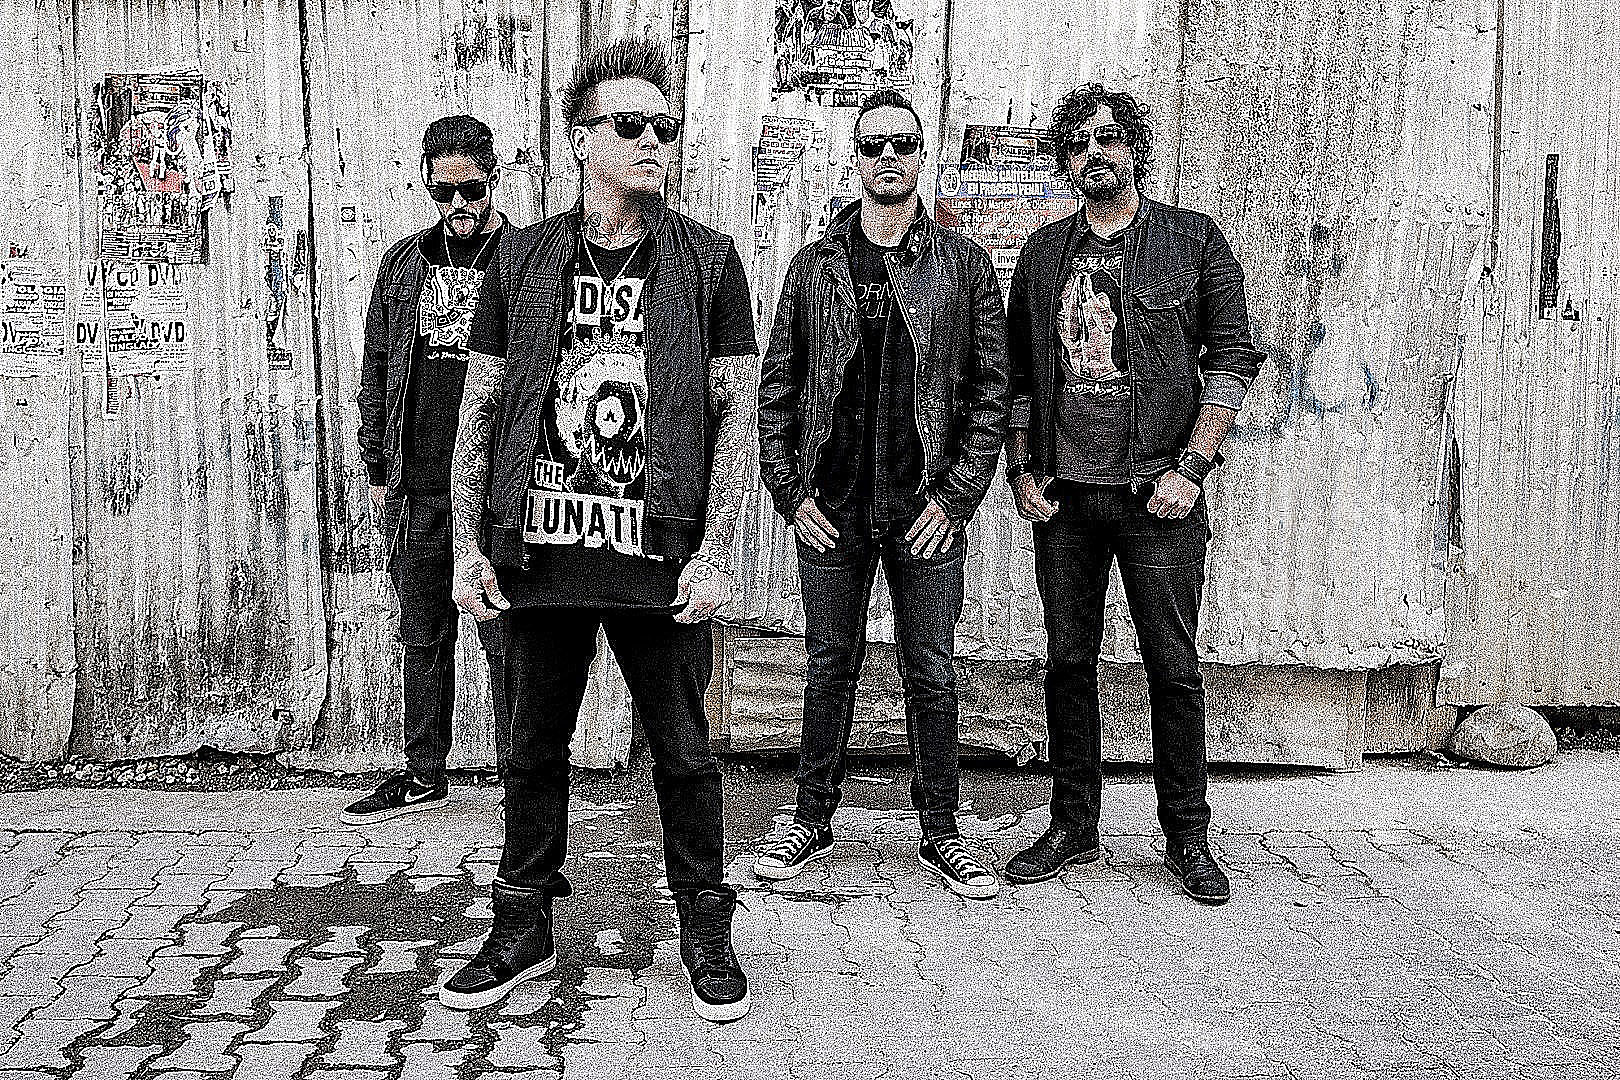 Poll: What’s the Best Papa Roach Song? – Vote Now